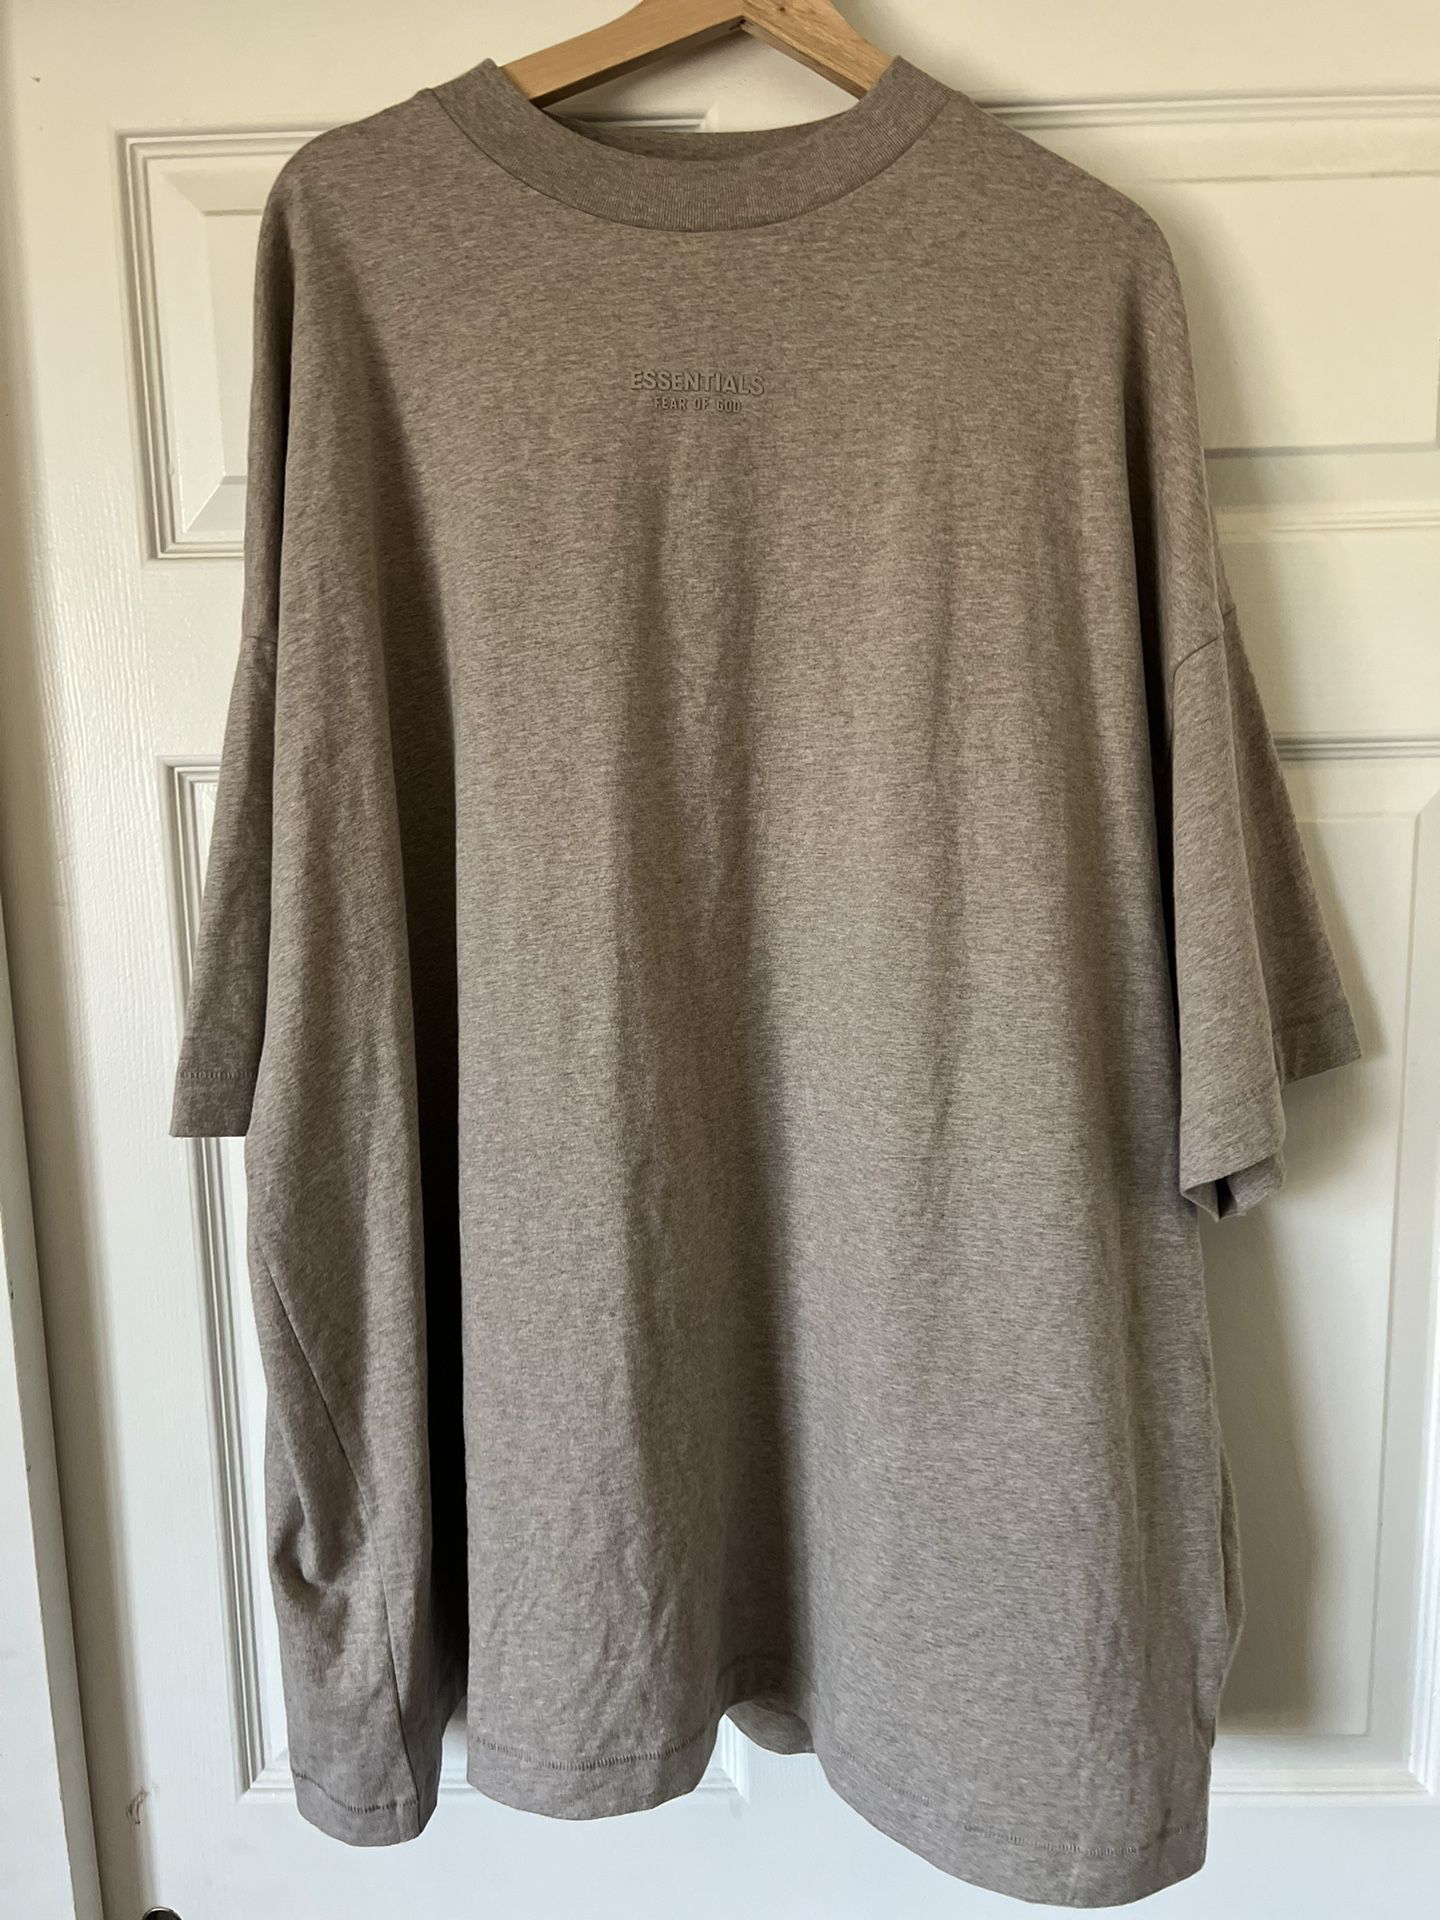 Fear Of God Tee Size Large